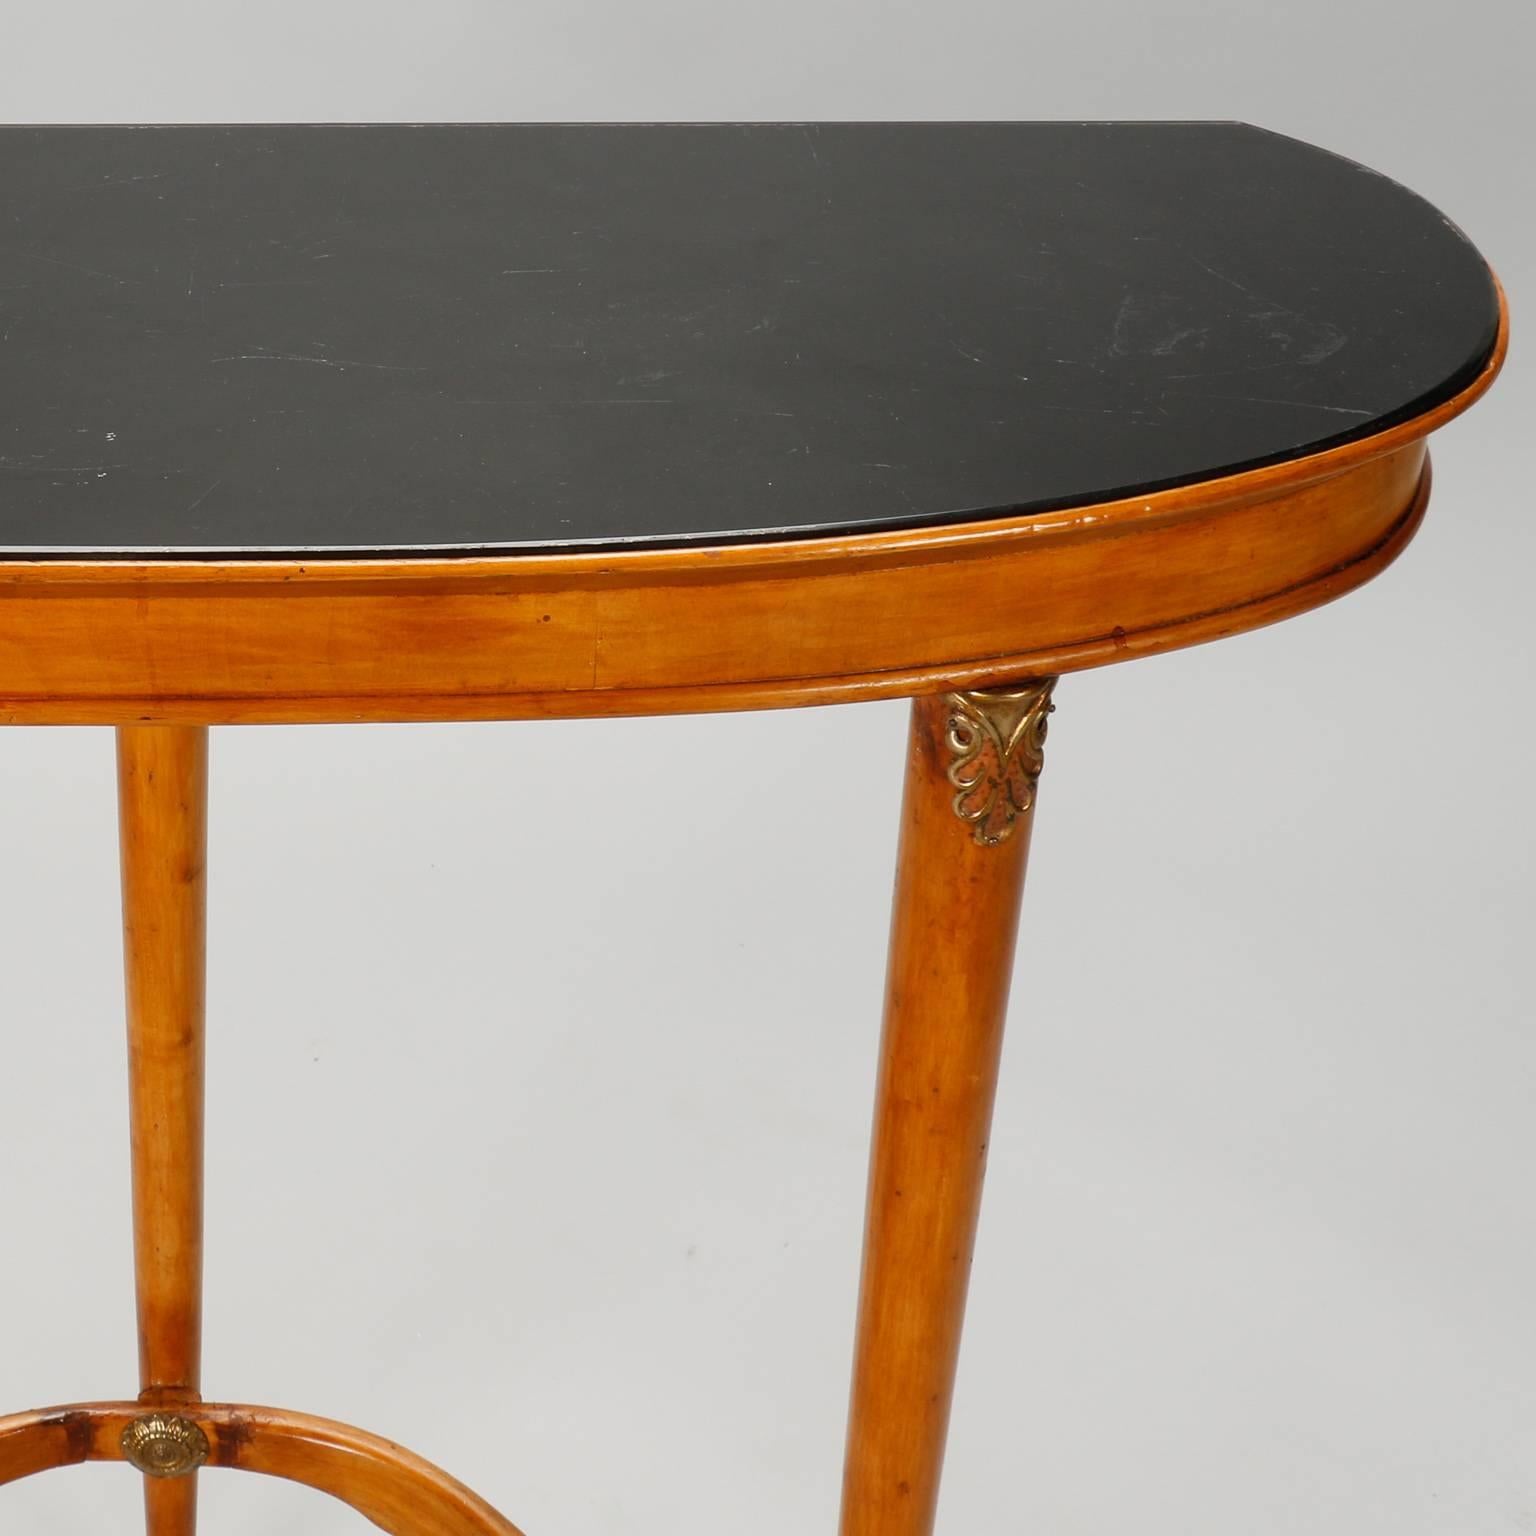 Three-Legged Art Deco Console with Brass Fittings and Black Glass Top 5